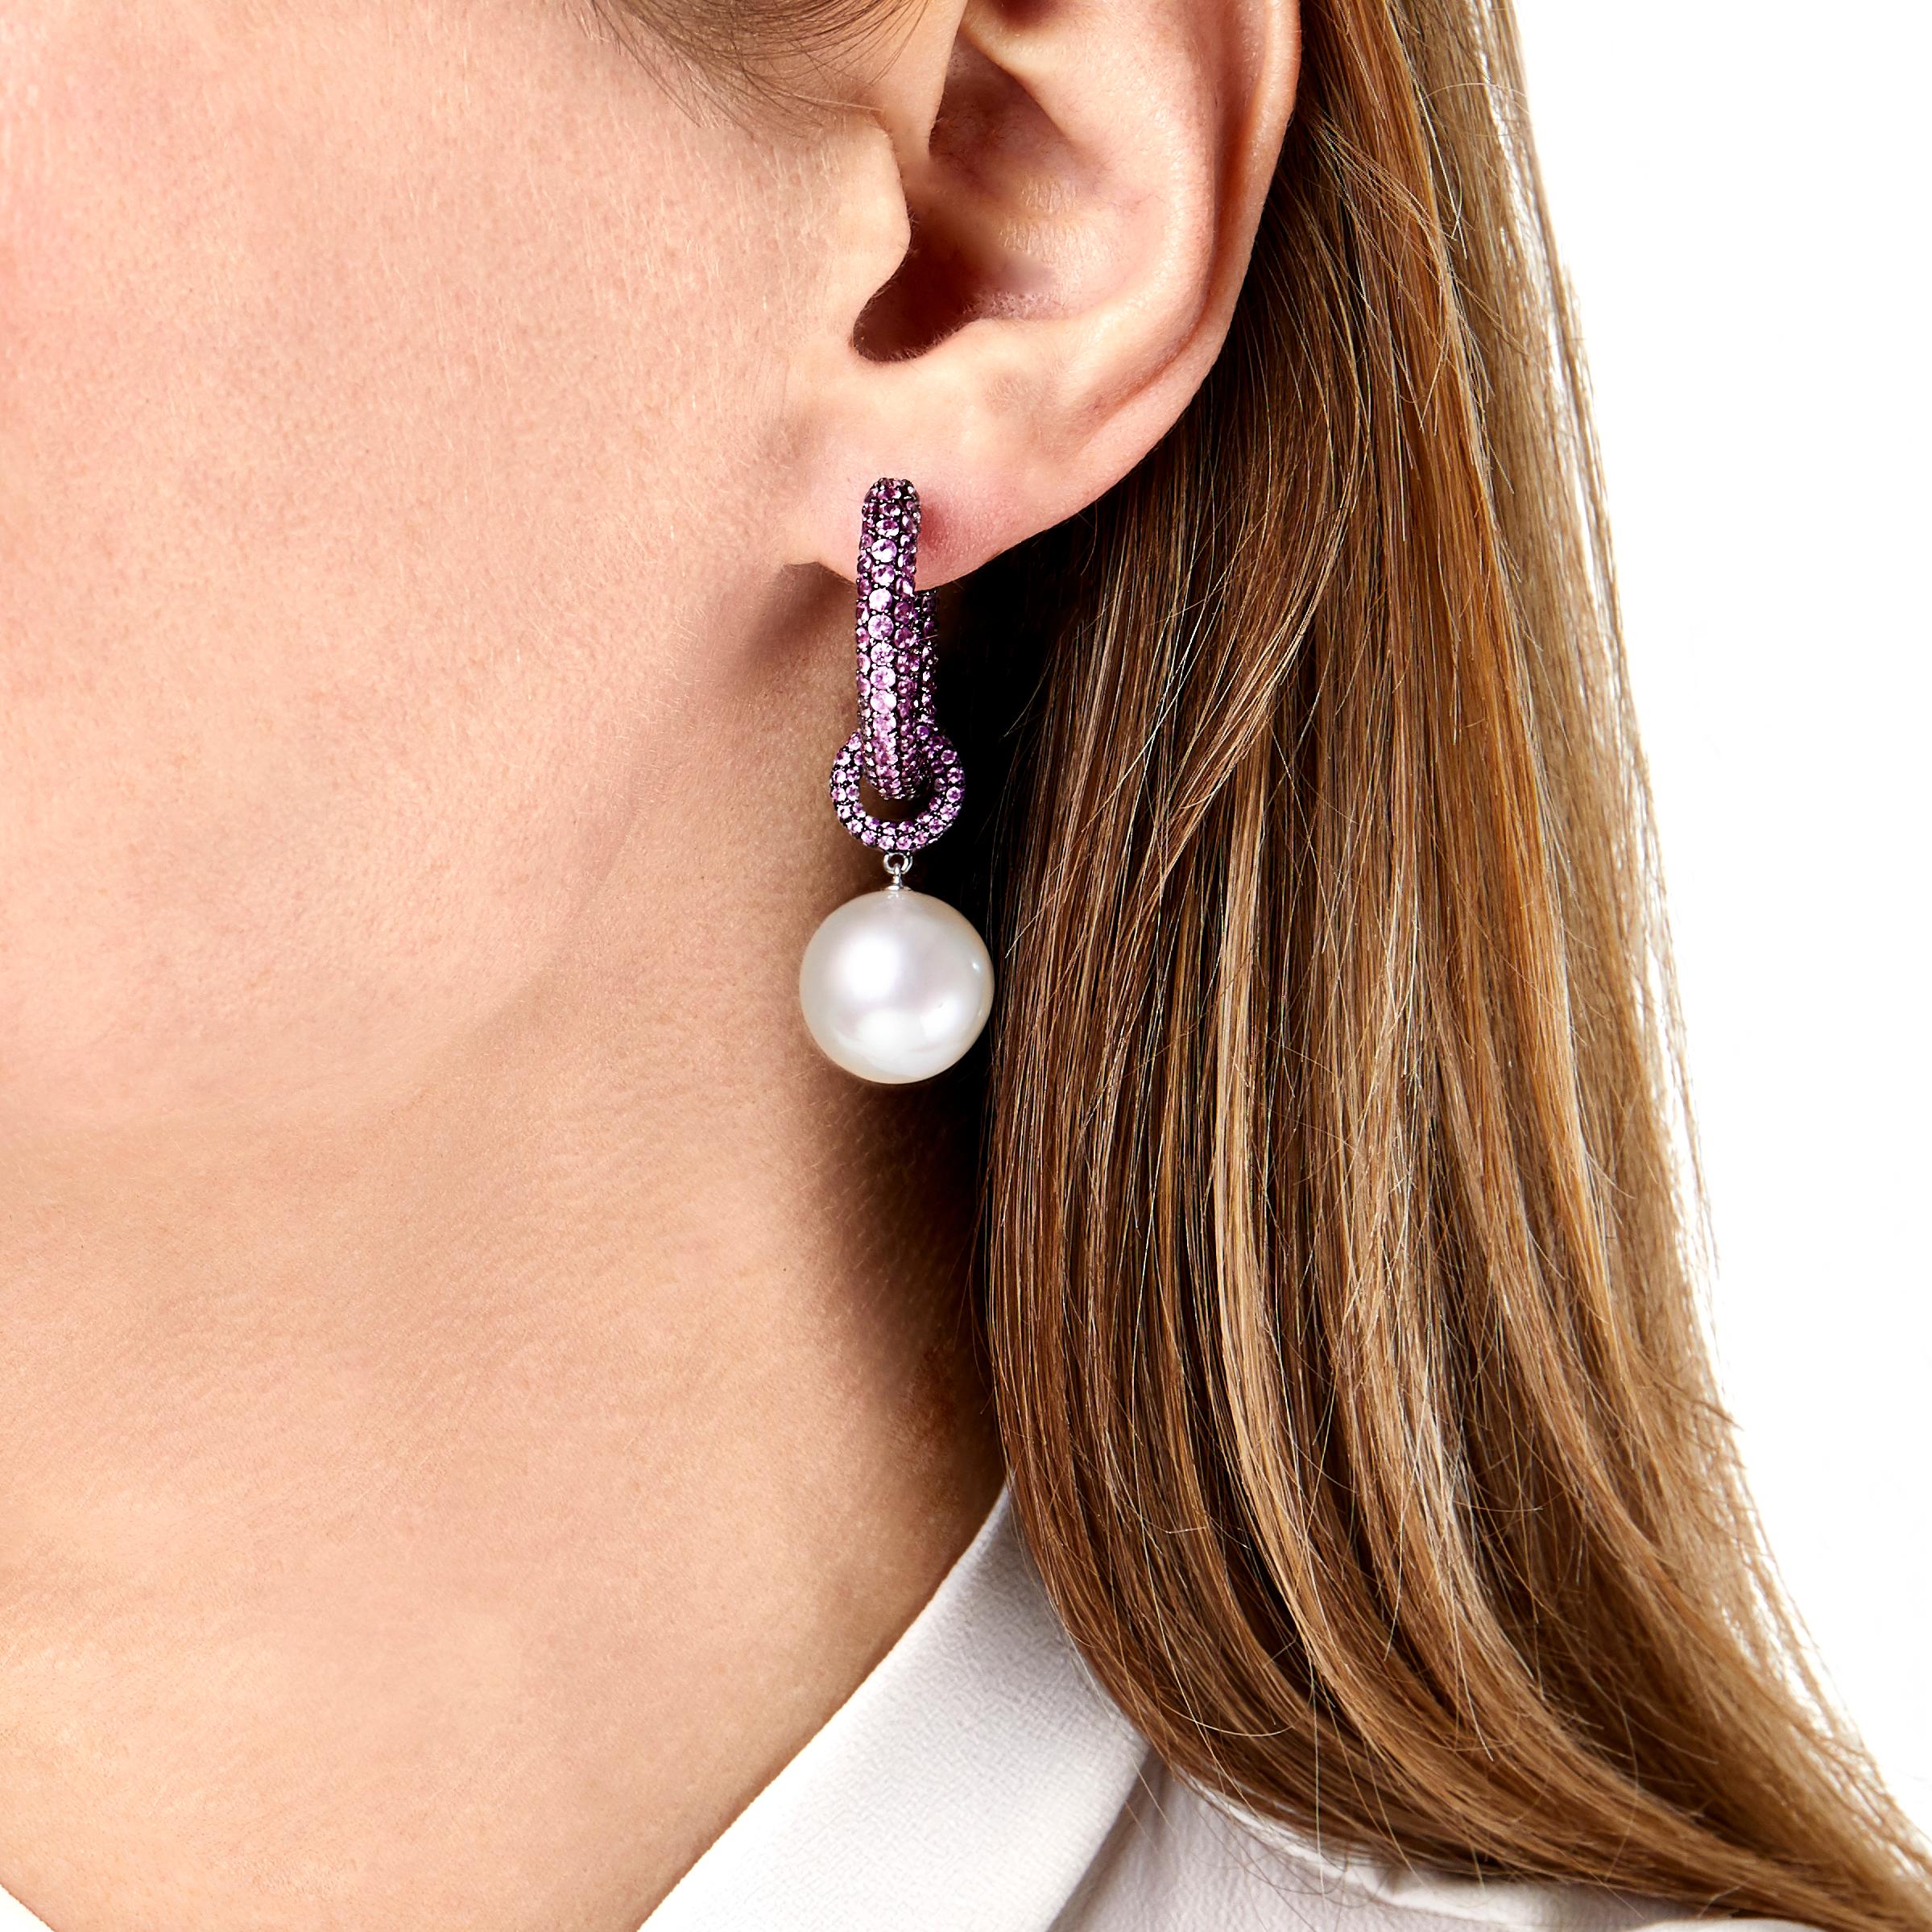 These Yoko London earrings are a beautiful fusion of modern fashion and precious gemstones. Featuring 10.49ct of Pink Sapphires with 14-15mm Australian South Sea Pearls, these hoops will make a unique centerpiece to your jewelry box. The pearl drop